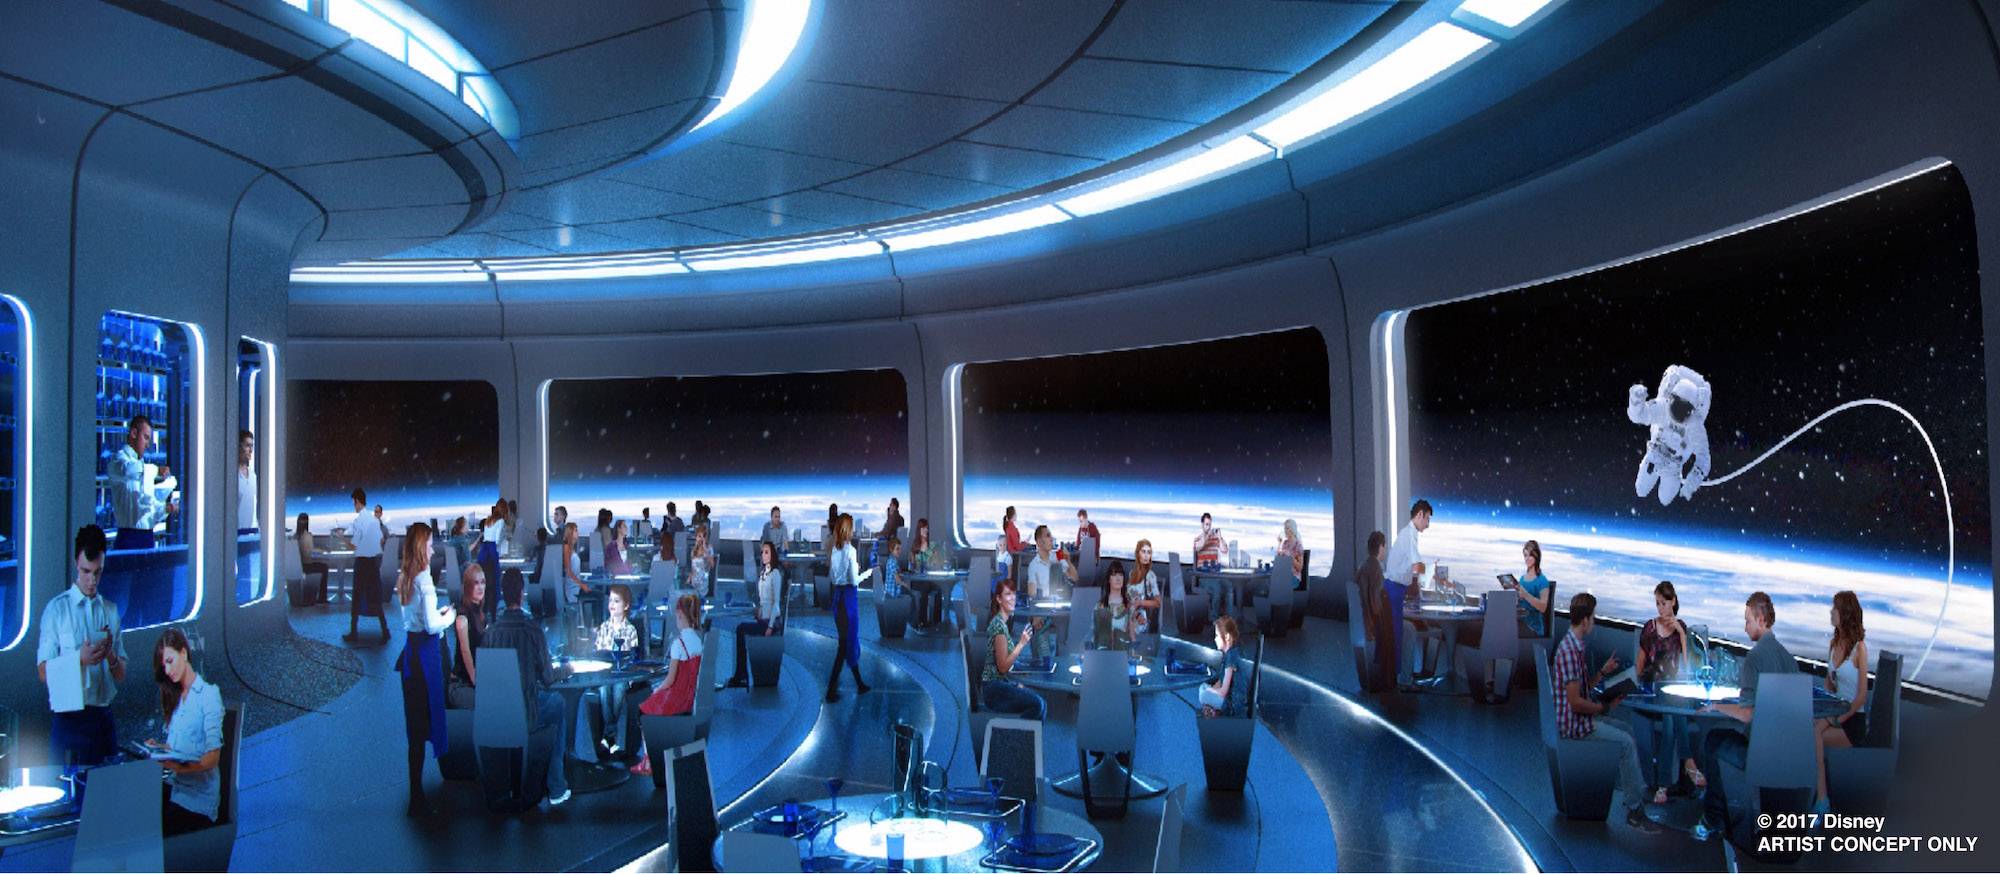 New Space Restaurant dining experience at Epcot's Future World